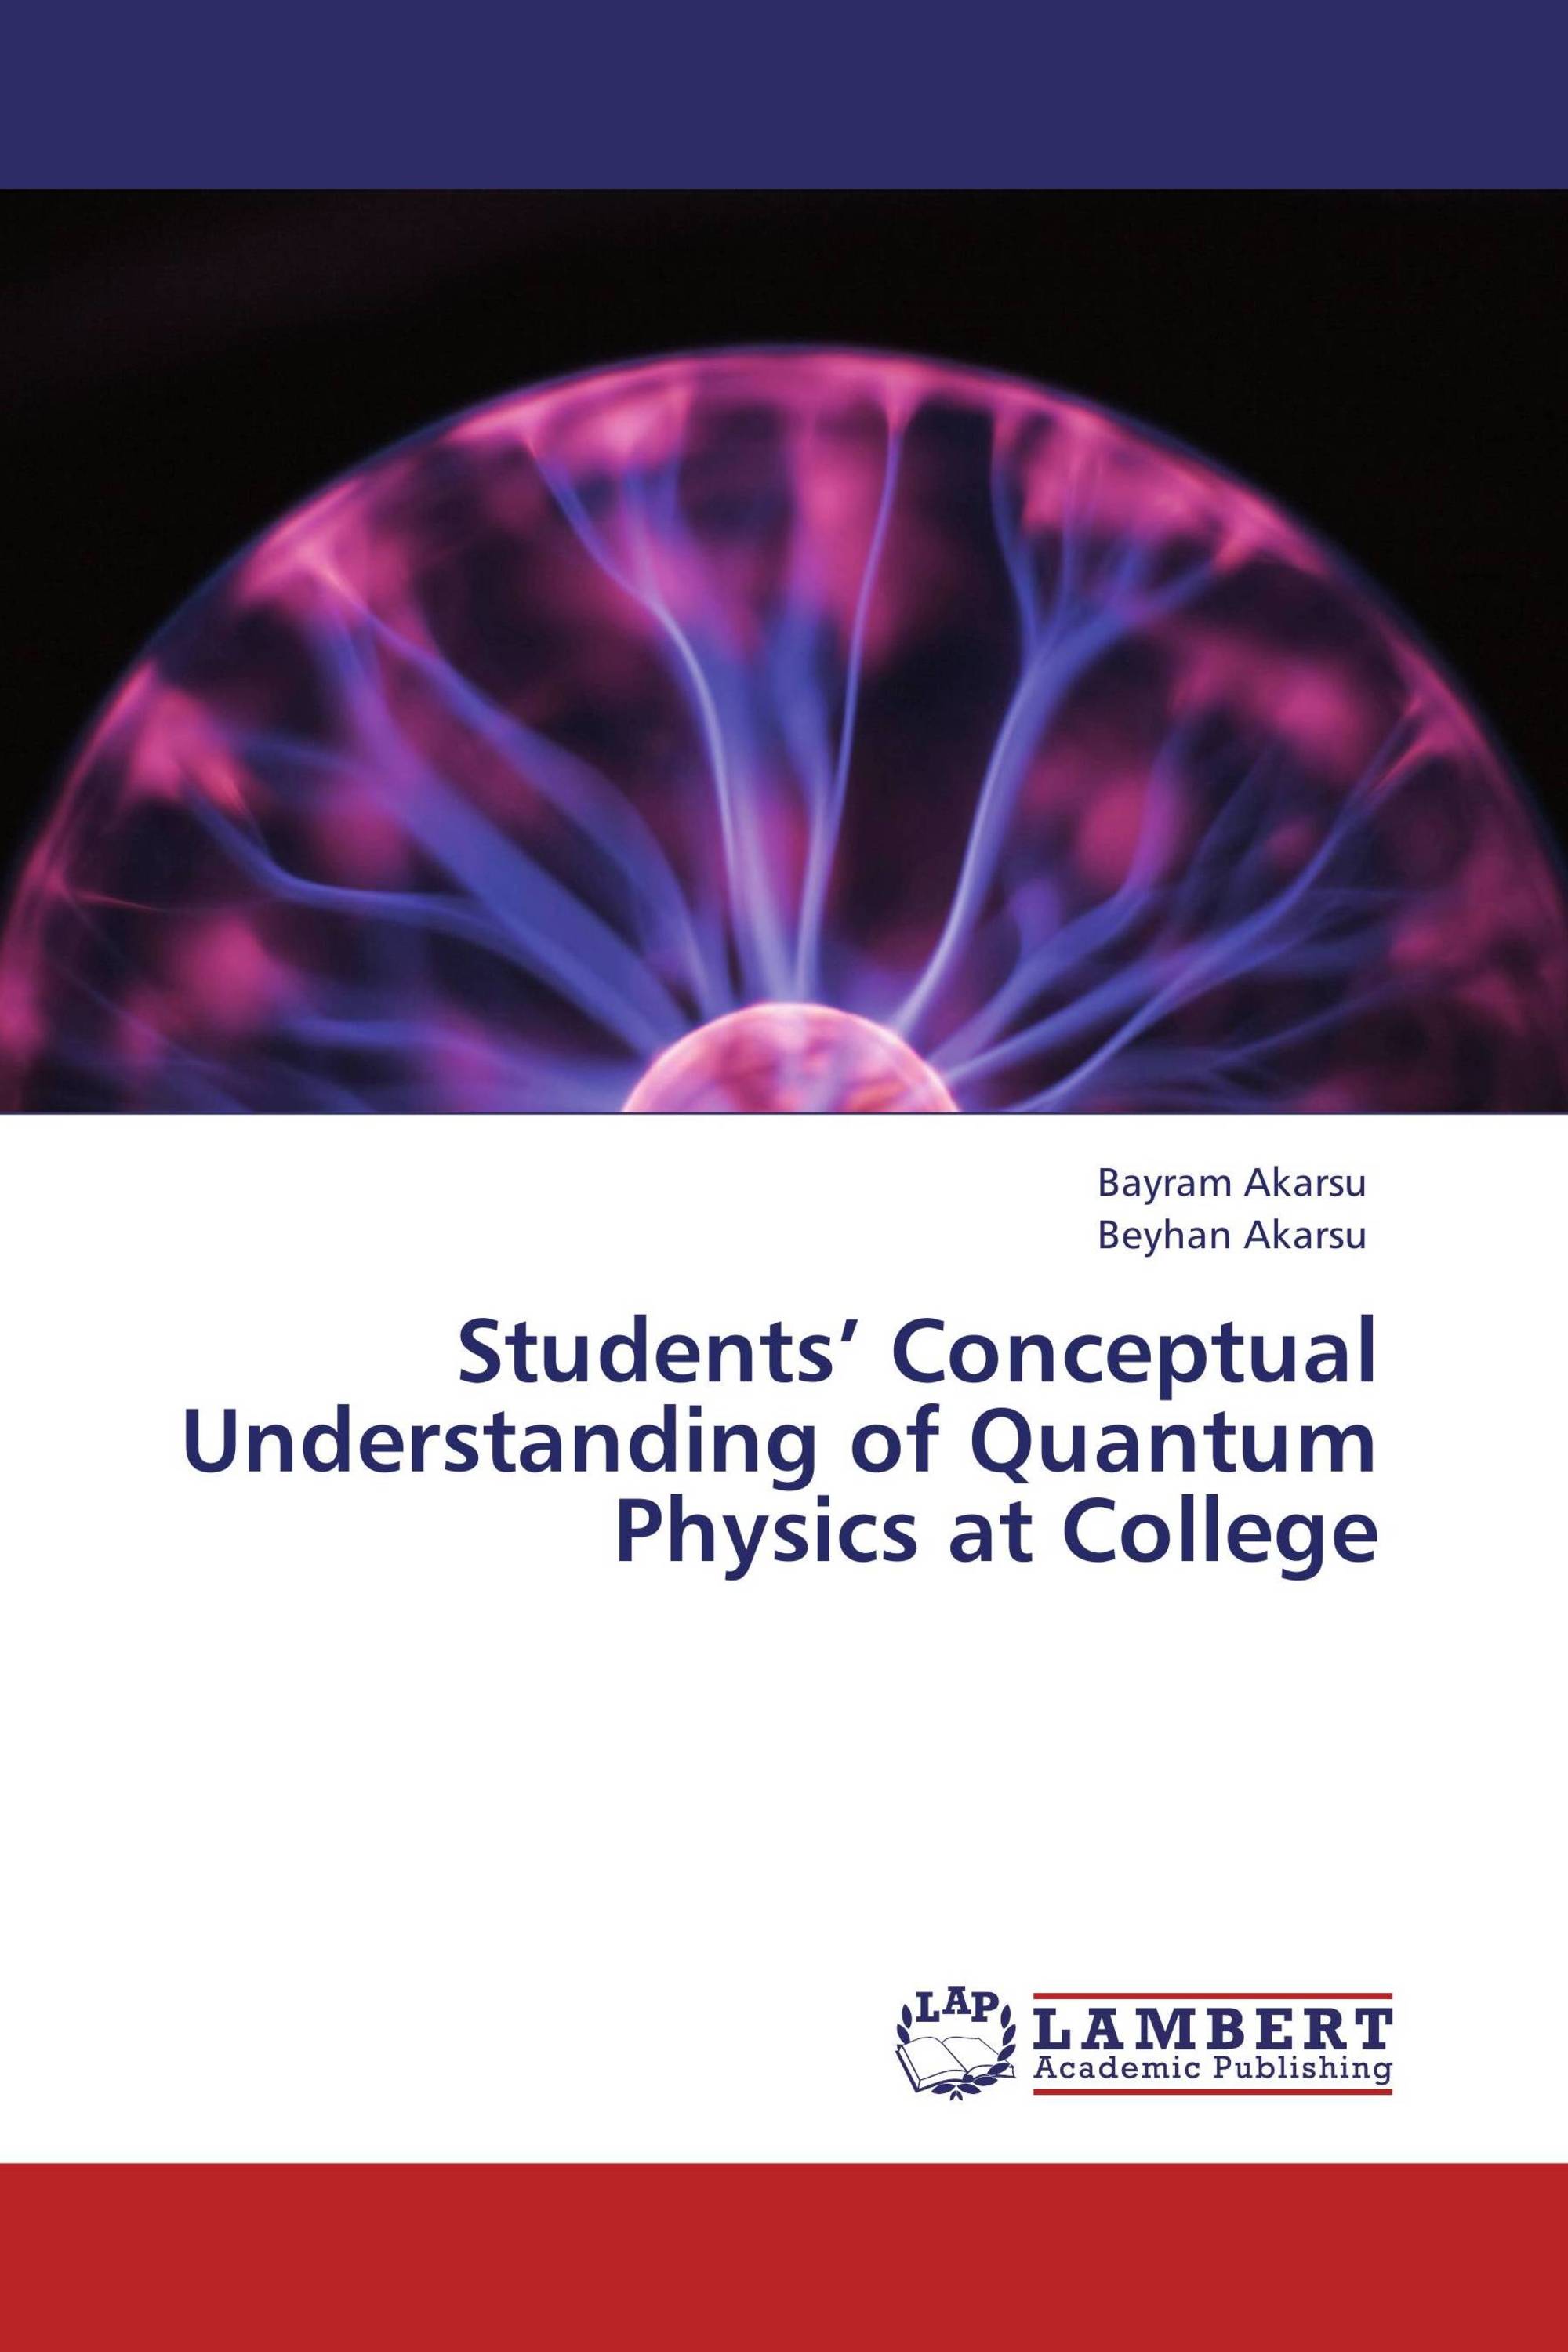 Students’ Conceptual Understanding of Quantum Physics at College